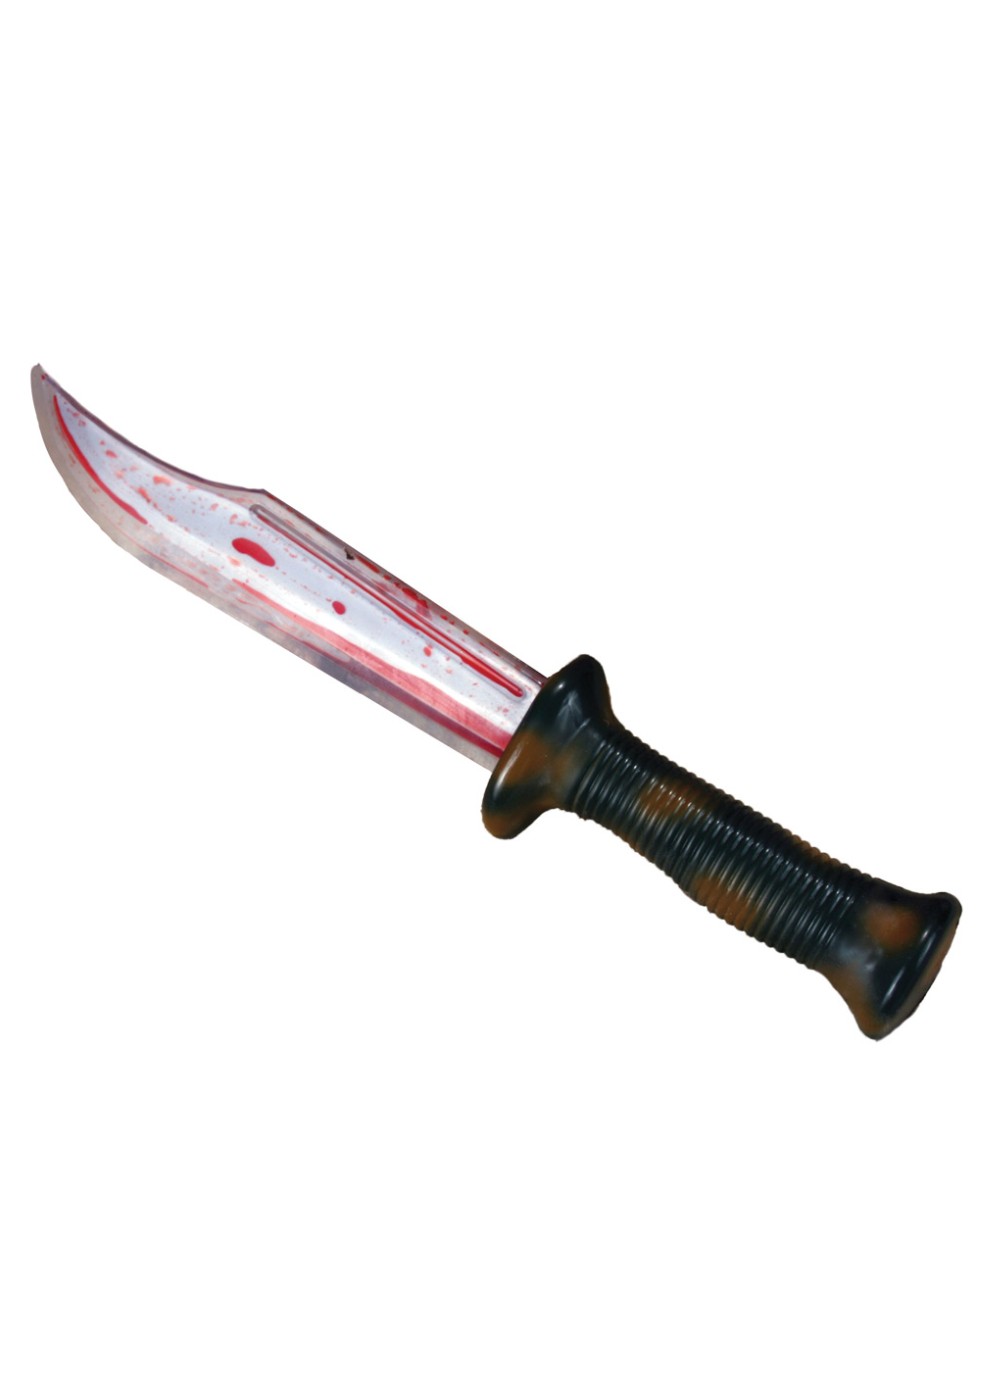 Bloody Survival Knife